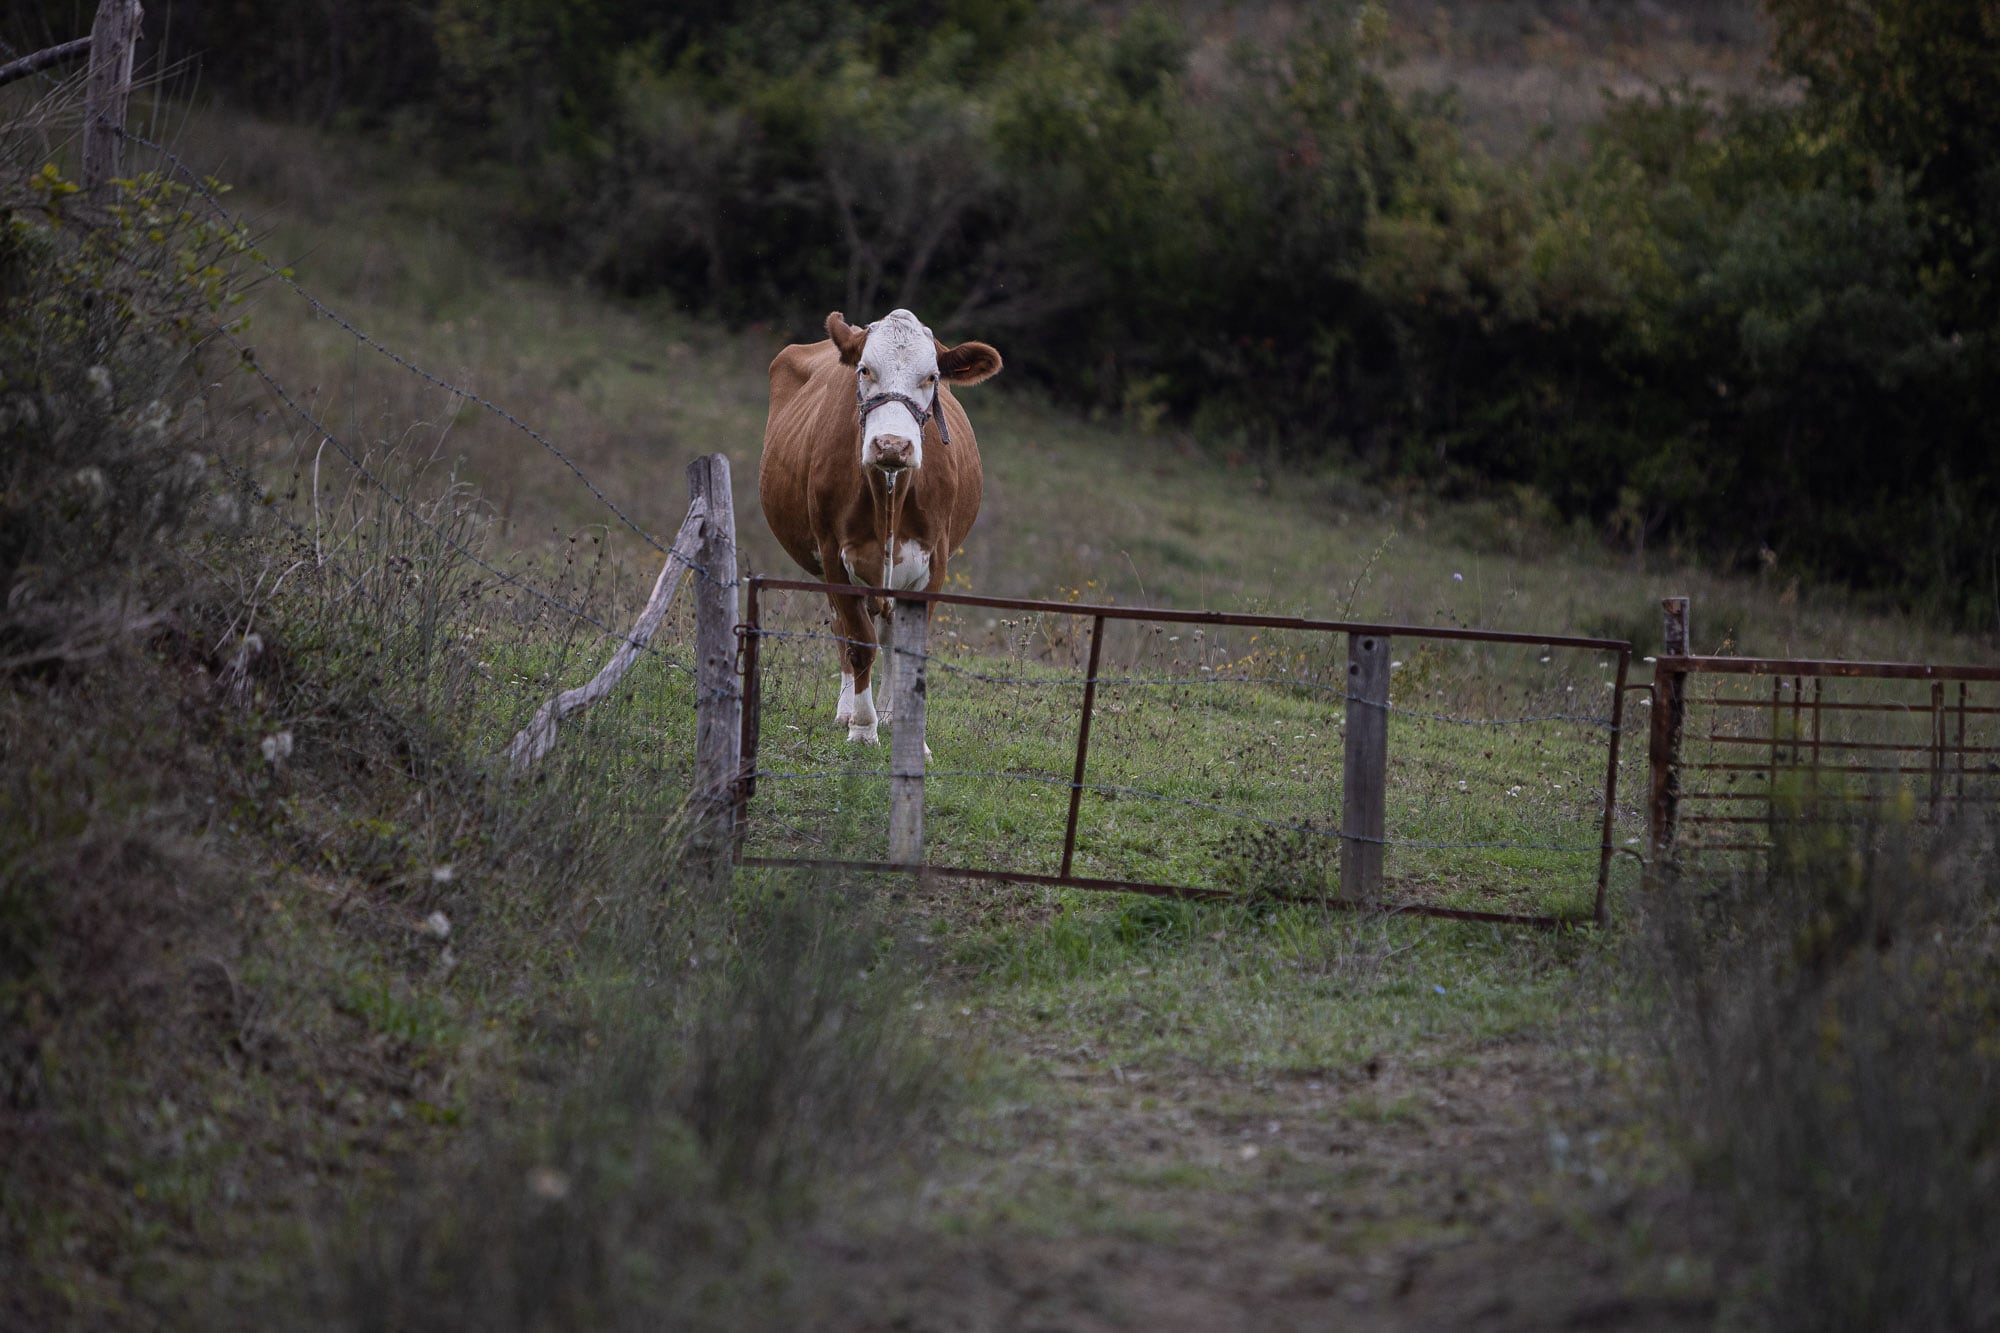 curious cow on my walk from Gebelit to Ayancik